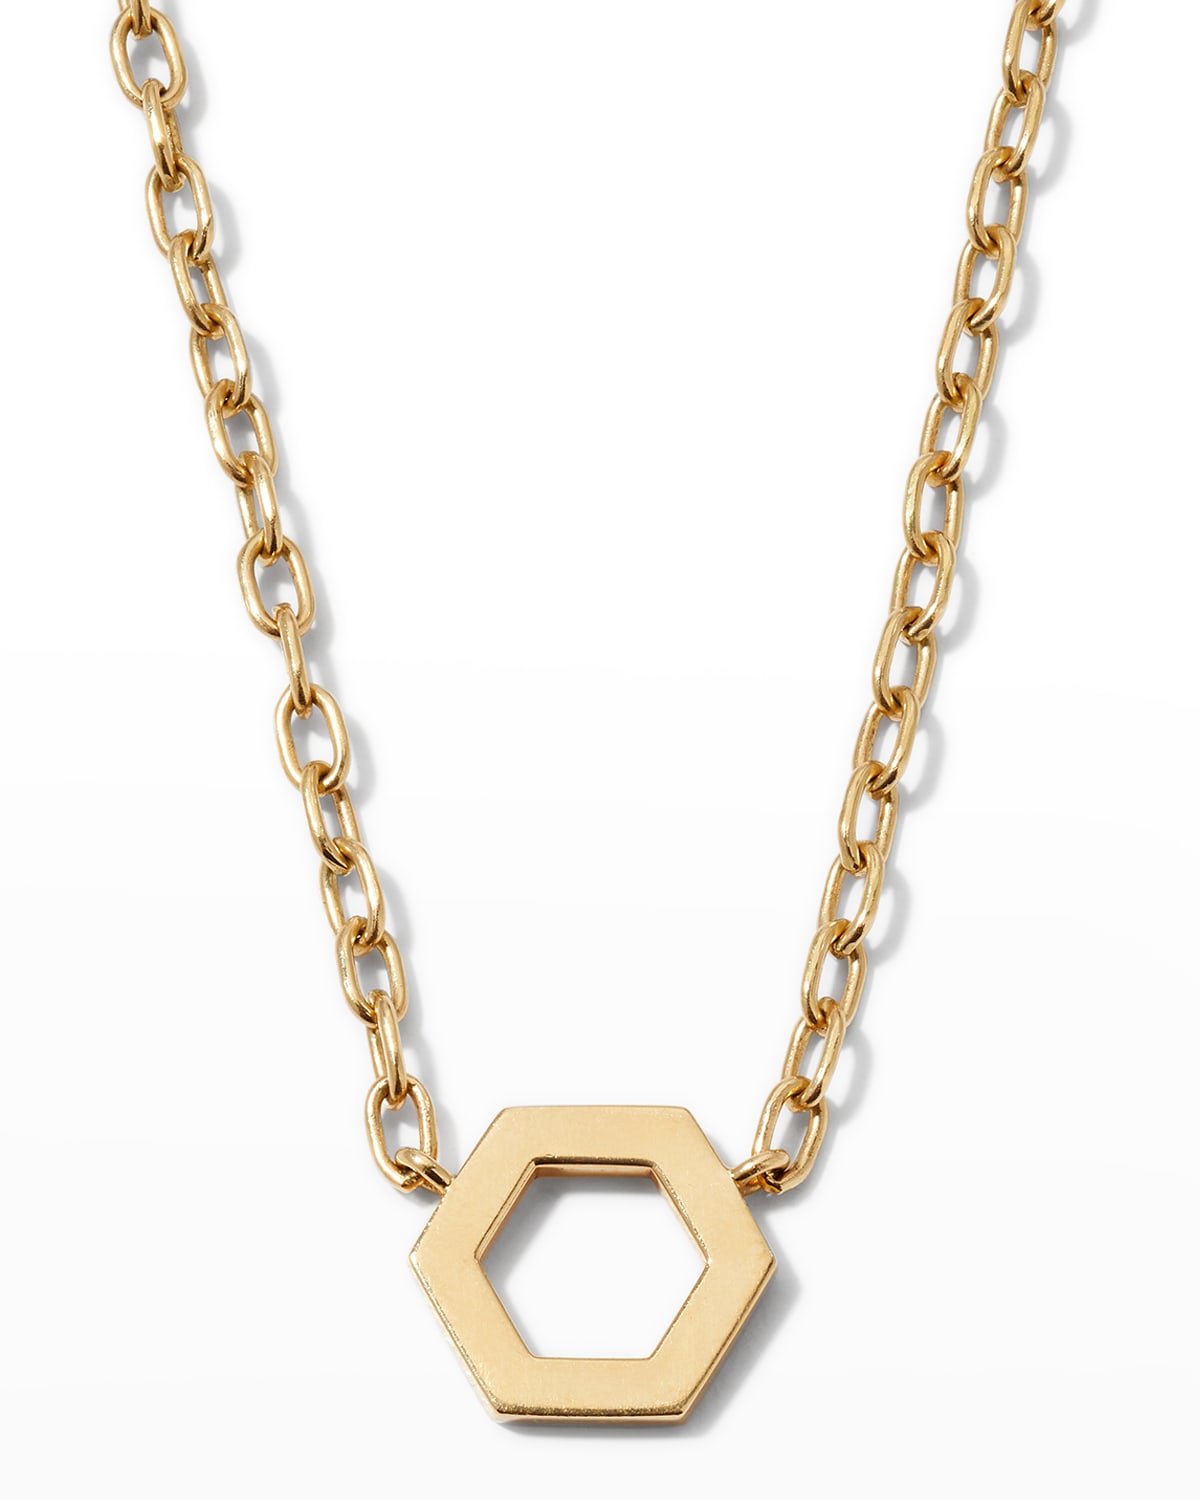 18K Yellow Gold Foundation Necklace, 18"L